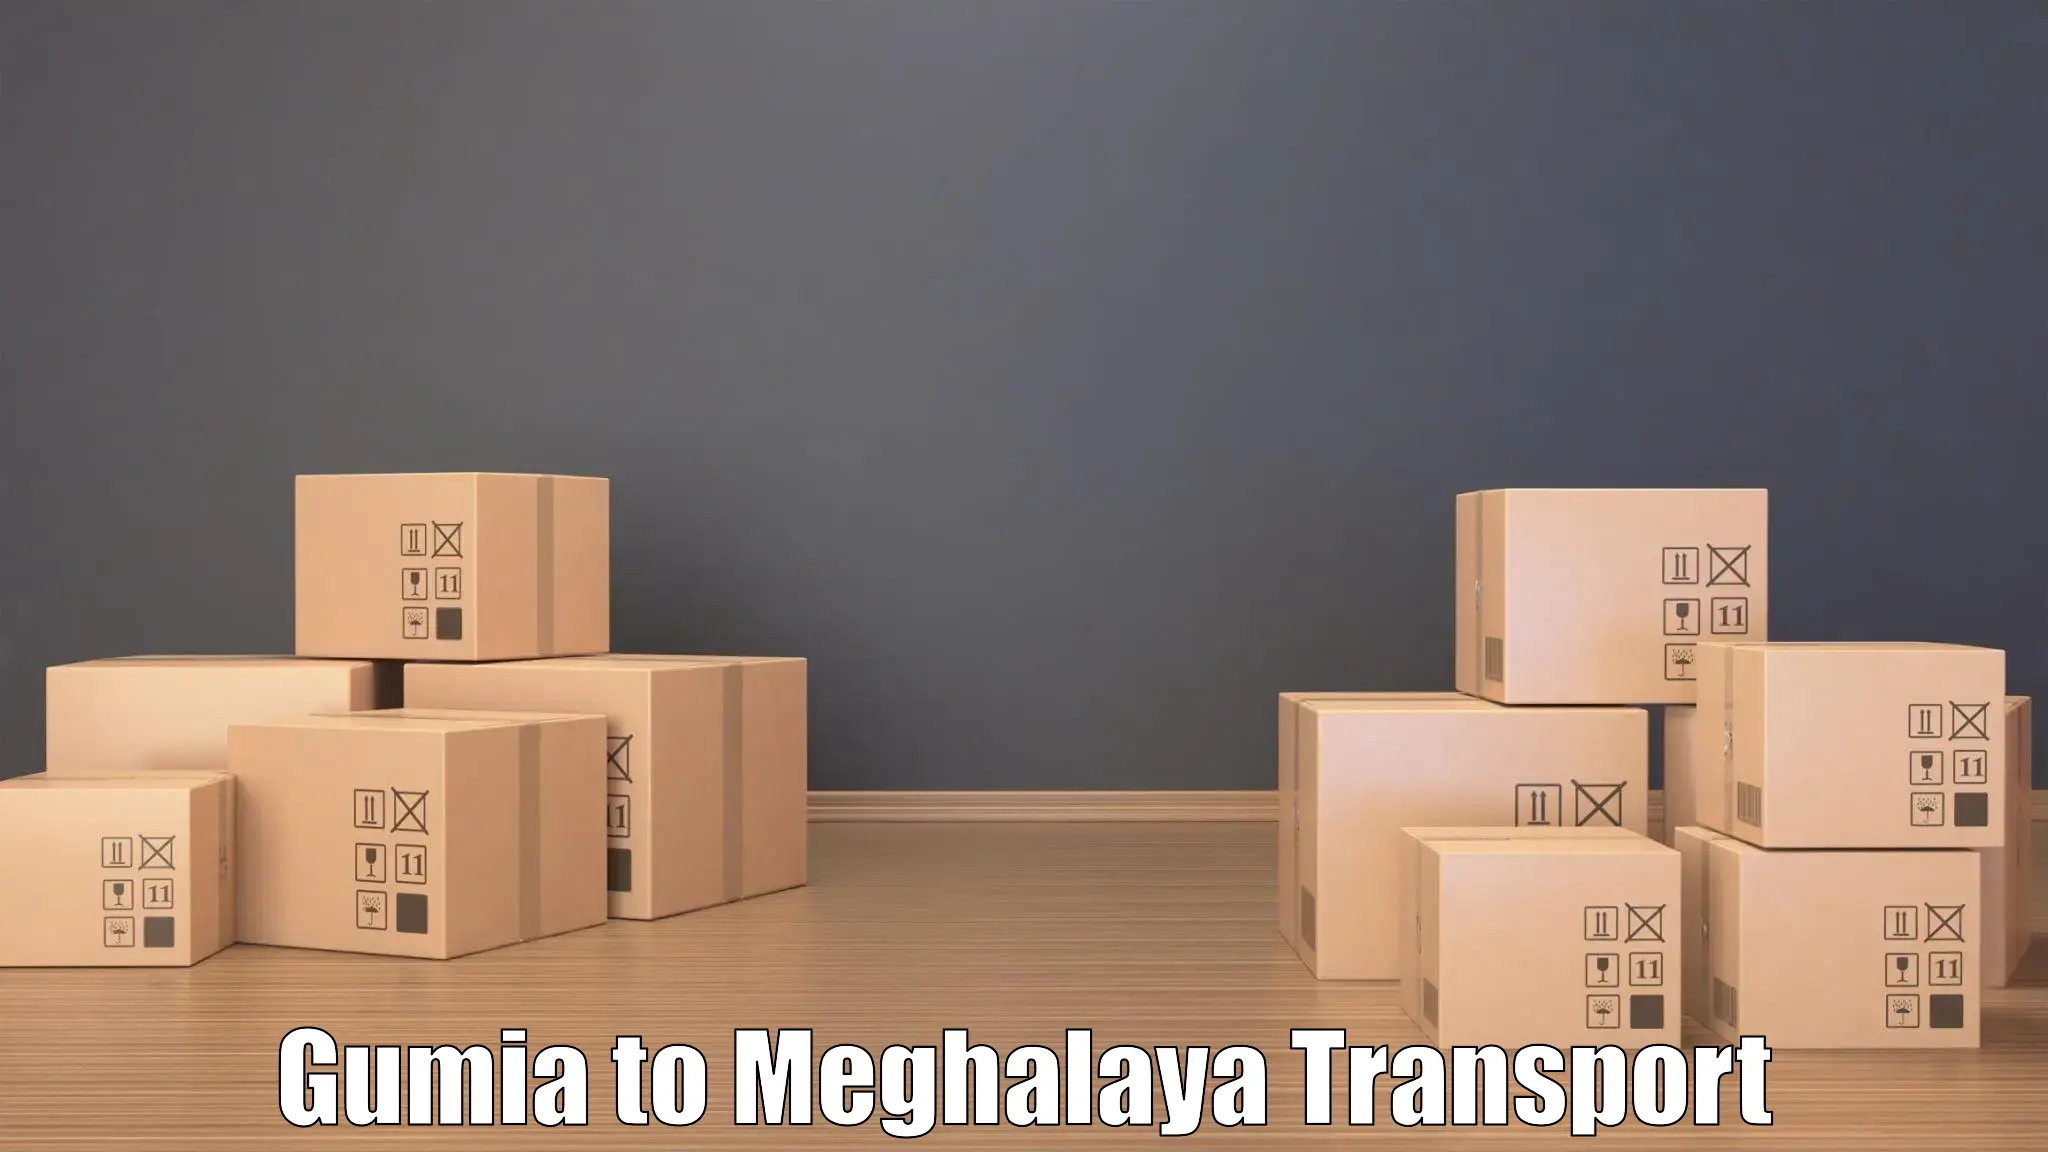 Road transport online services Gumia to Meghalaya